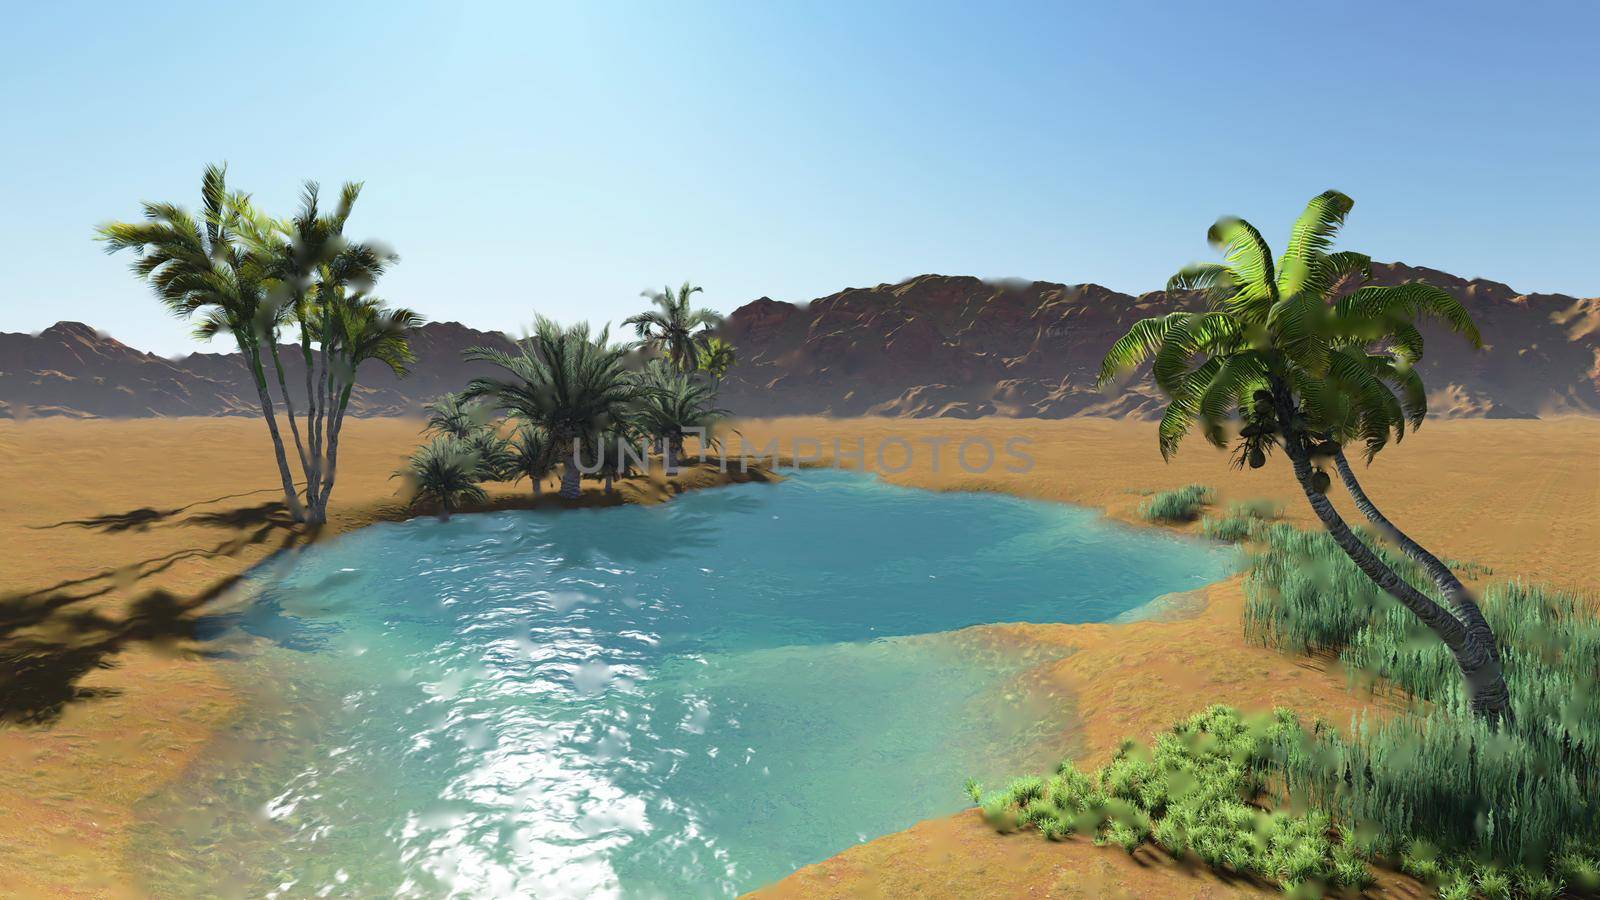 3d illustration - Oasis in the desert, dark blue clear water surrounded by palm trees and sand dunes on a very hot day by vitanovski